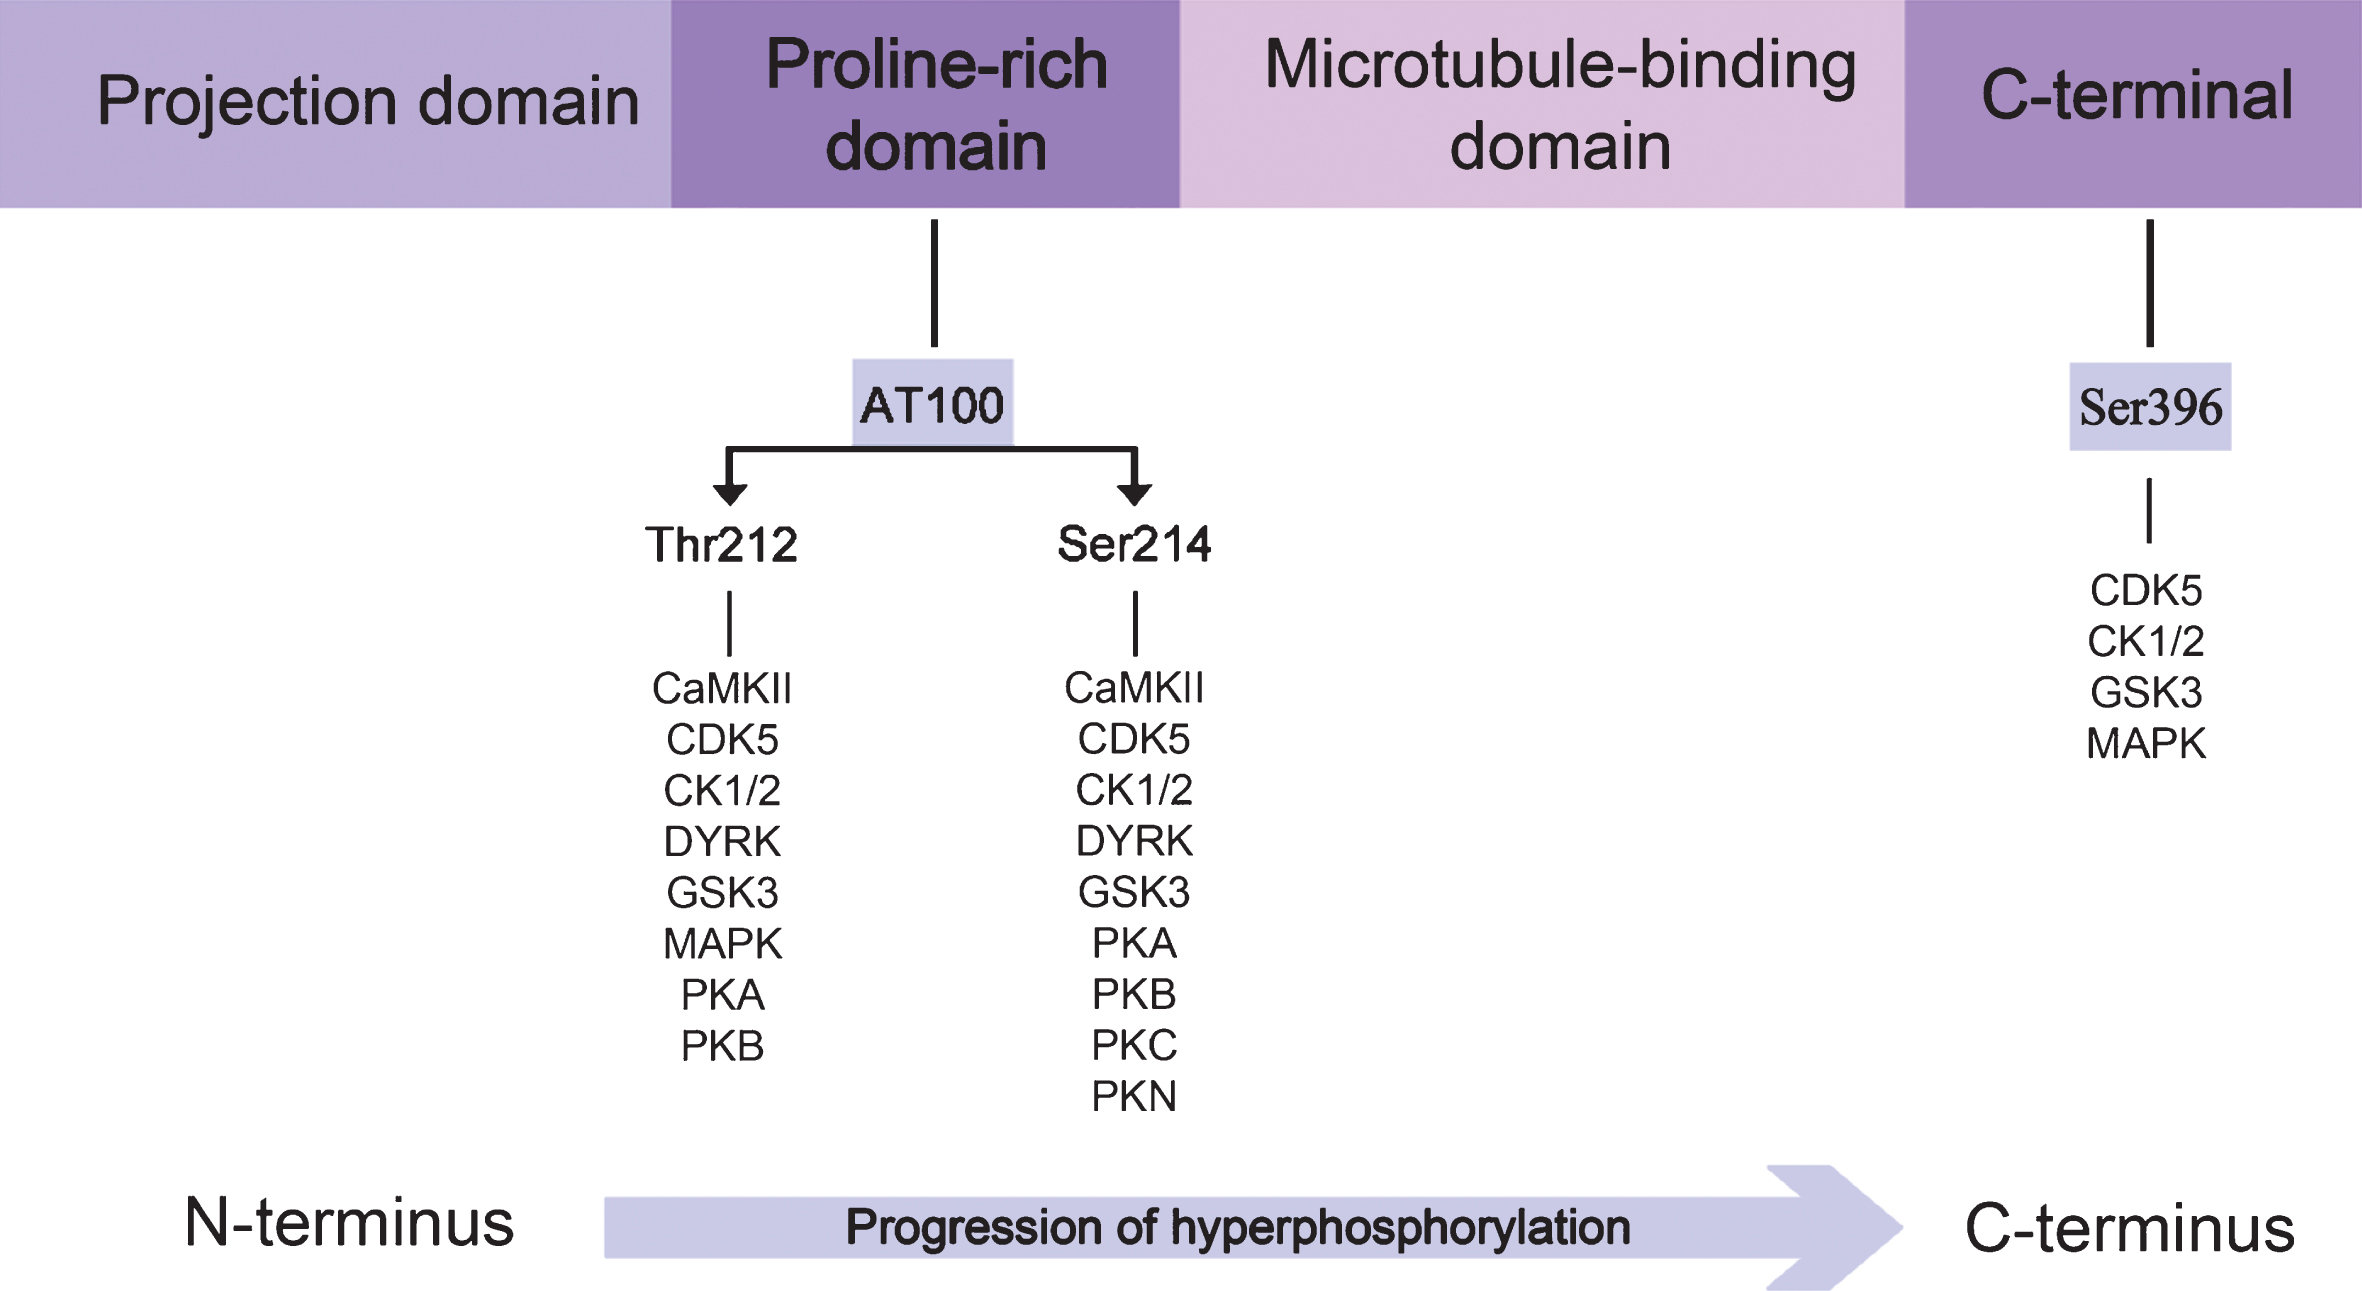 Direction of the progression of tau protein hyperphosphorylation. The proline-rich domain contains the epitope which is recognized by the AT100 antibody, whereas pS396 antibody recognizes the C-terminal region. Specific kinases phosphorylating each residue are illustrated. A blue arrow highlights the sequential tau hyperphosphorylation from the N-terminal to the C-terminal.